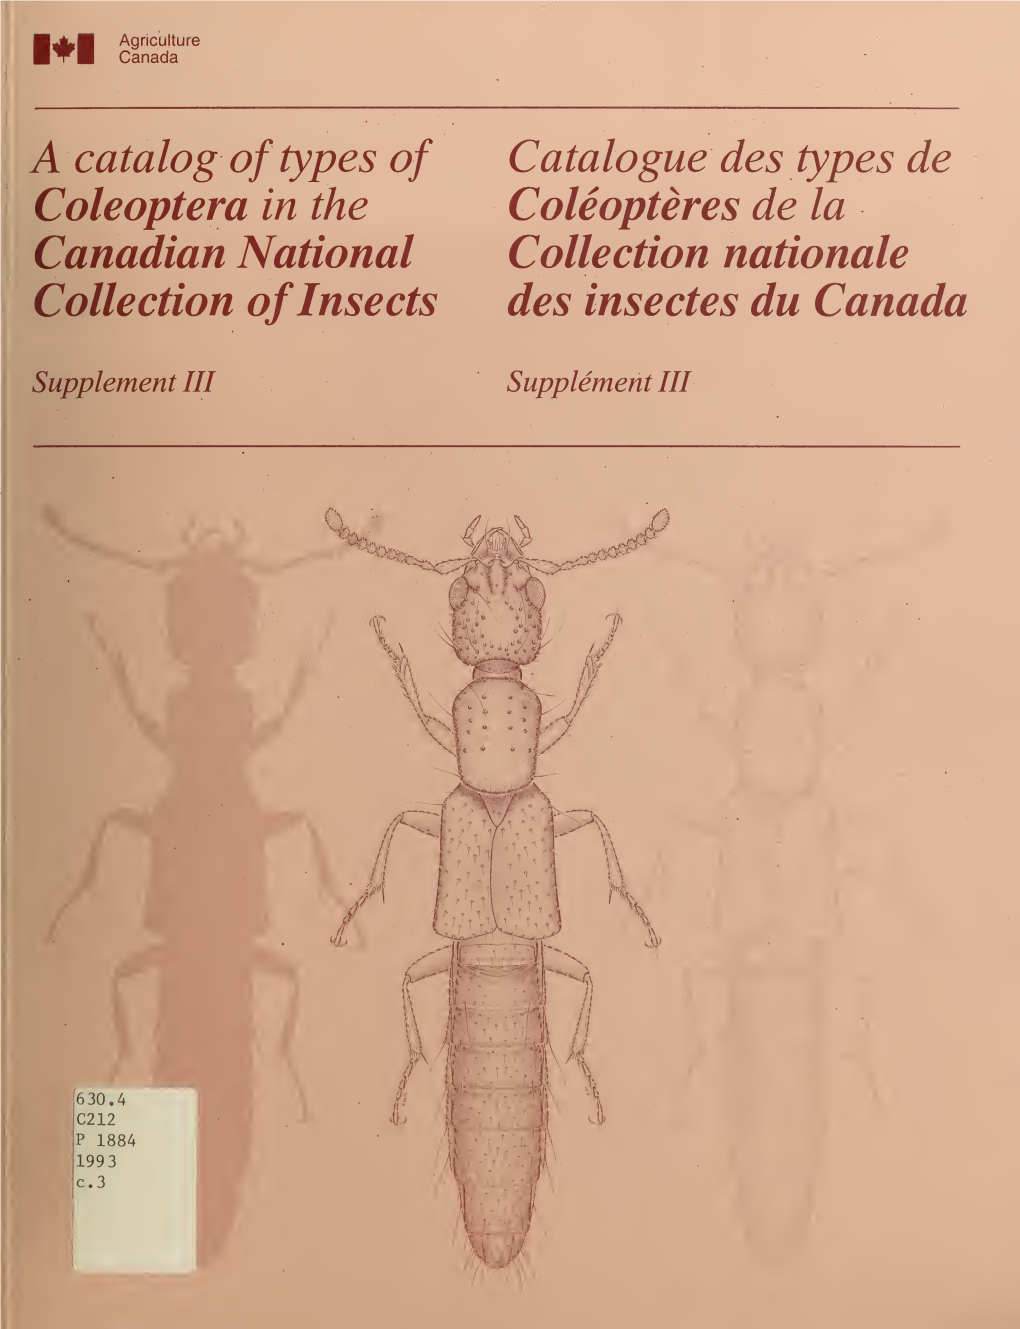 A Catalog of Types of Coleoptera in the Canadian National Collection of Insects